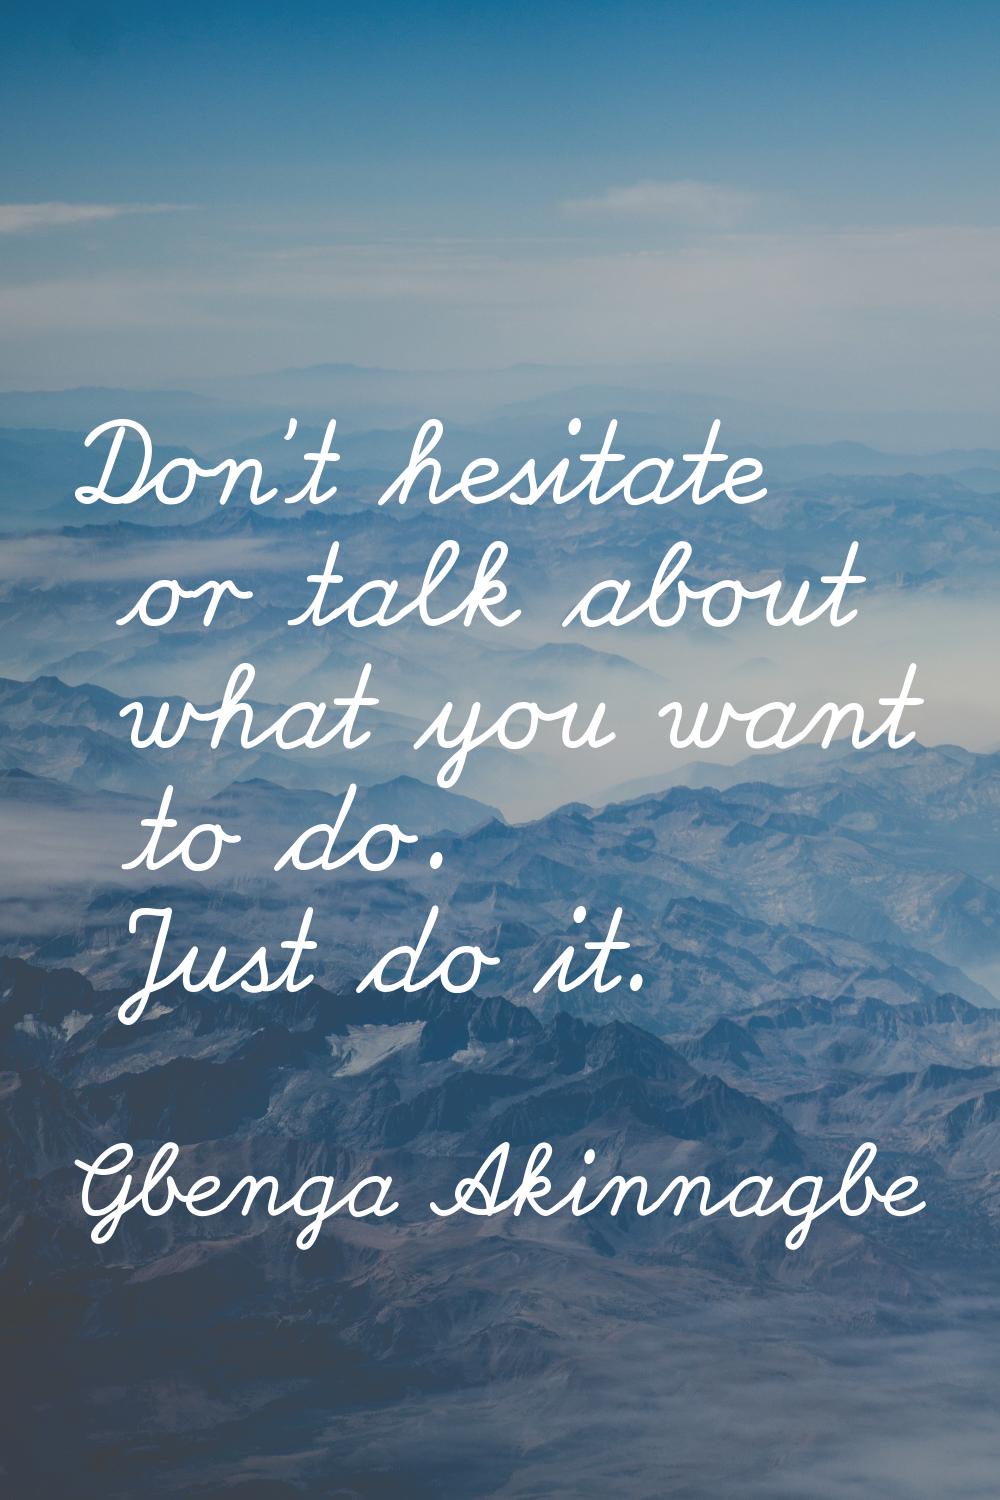 Don't hesitate or talk about what you want to do. Just do it.